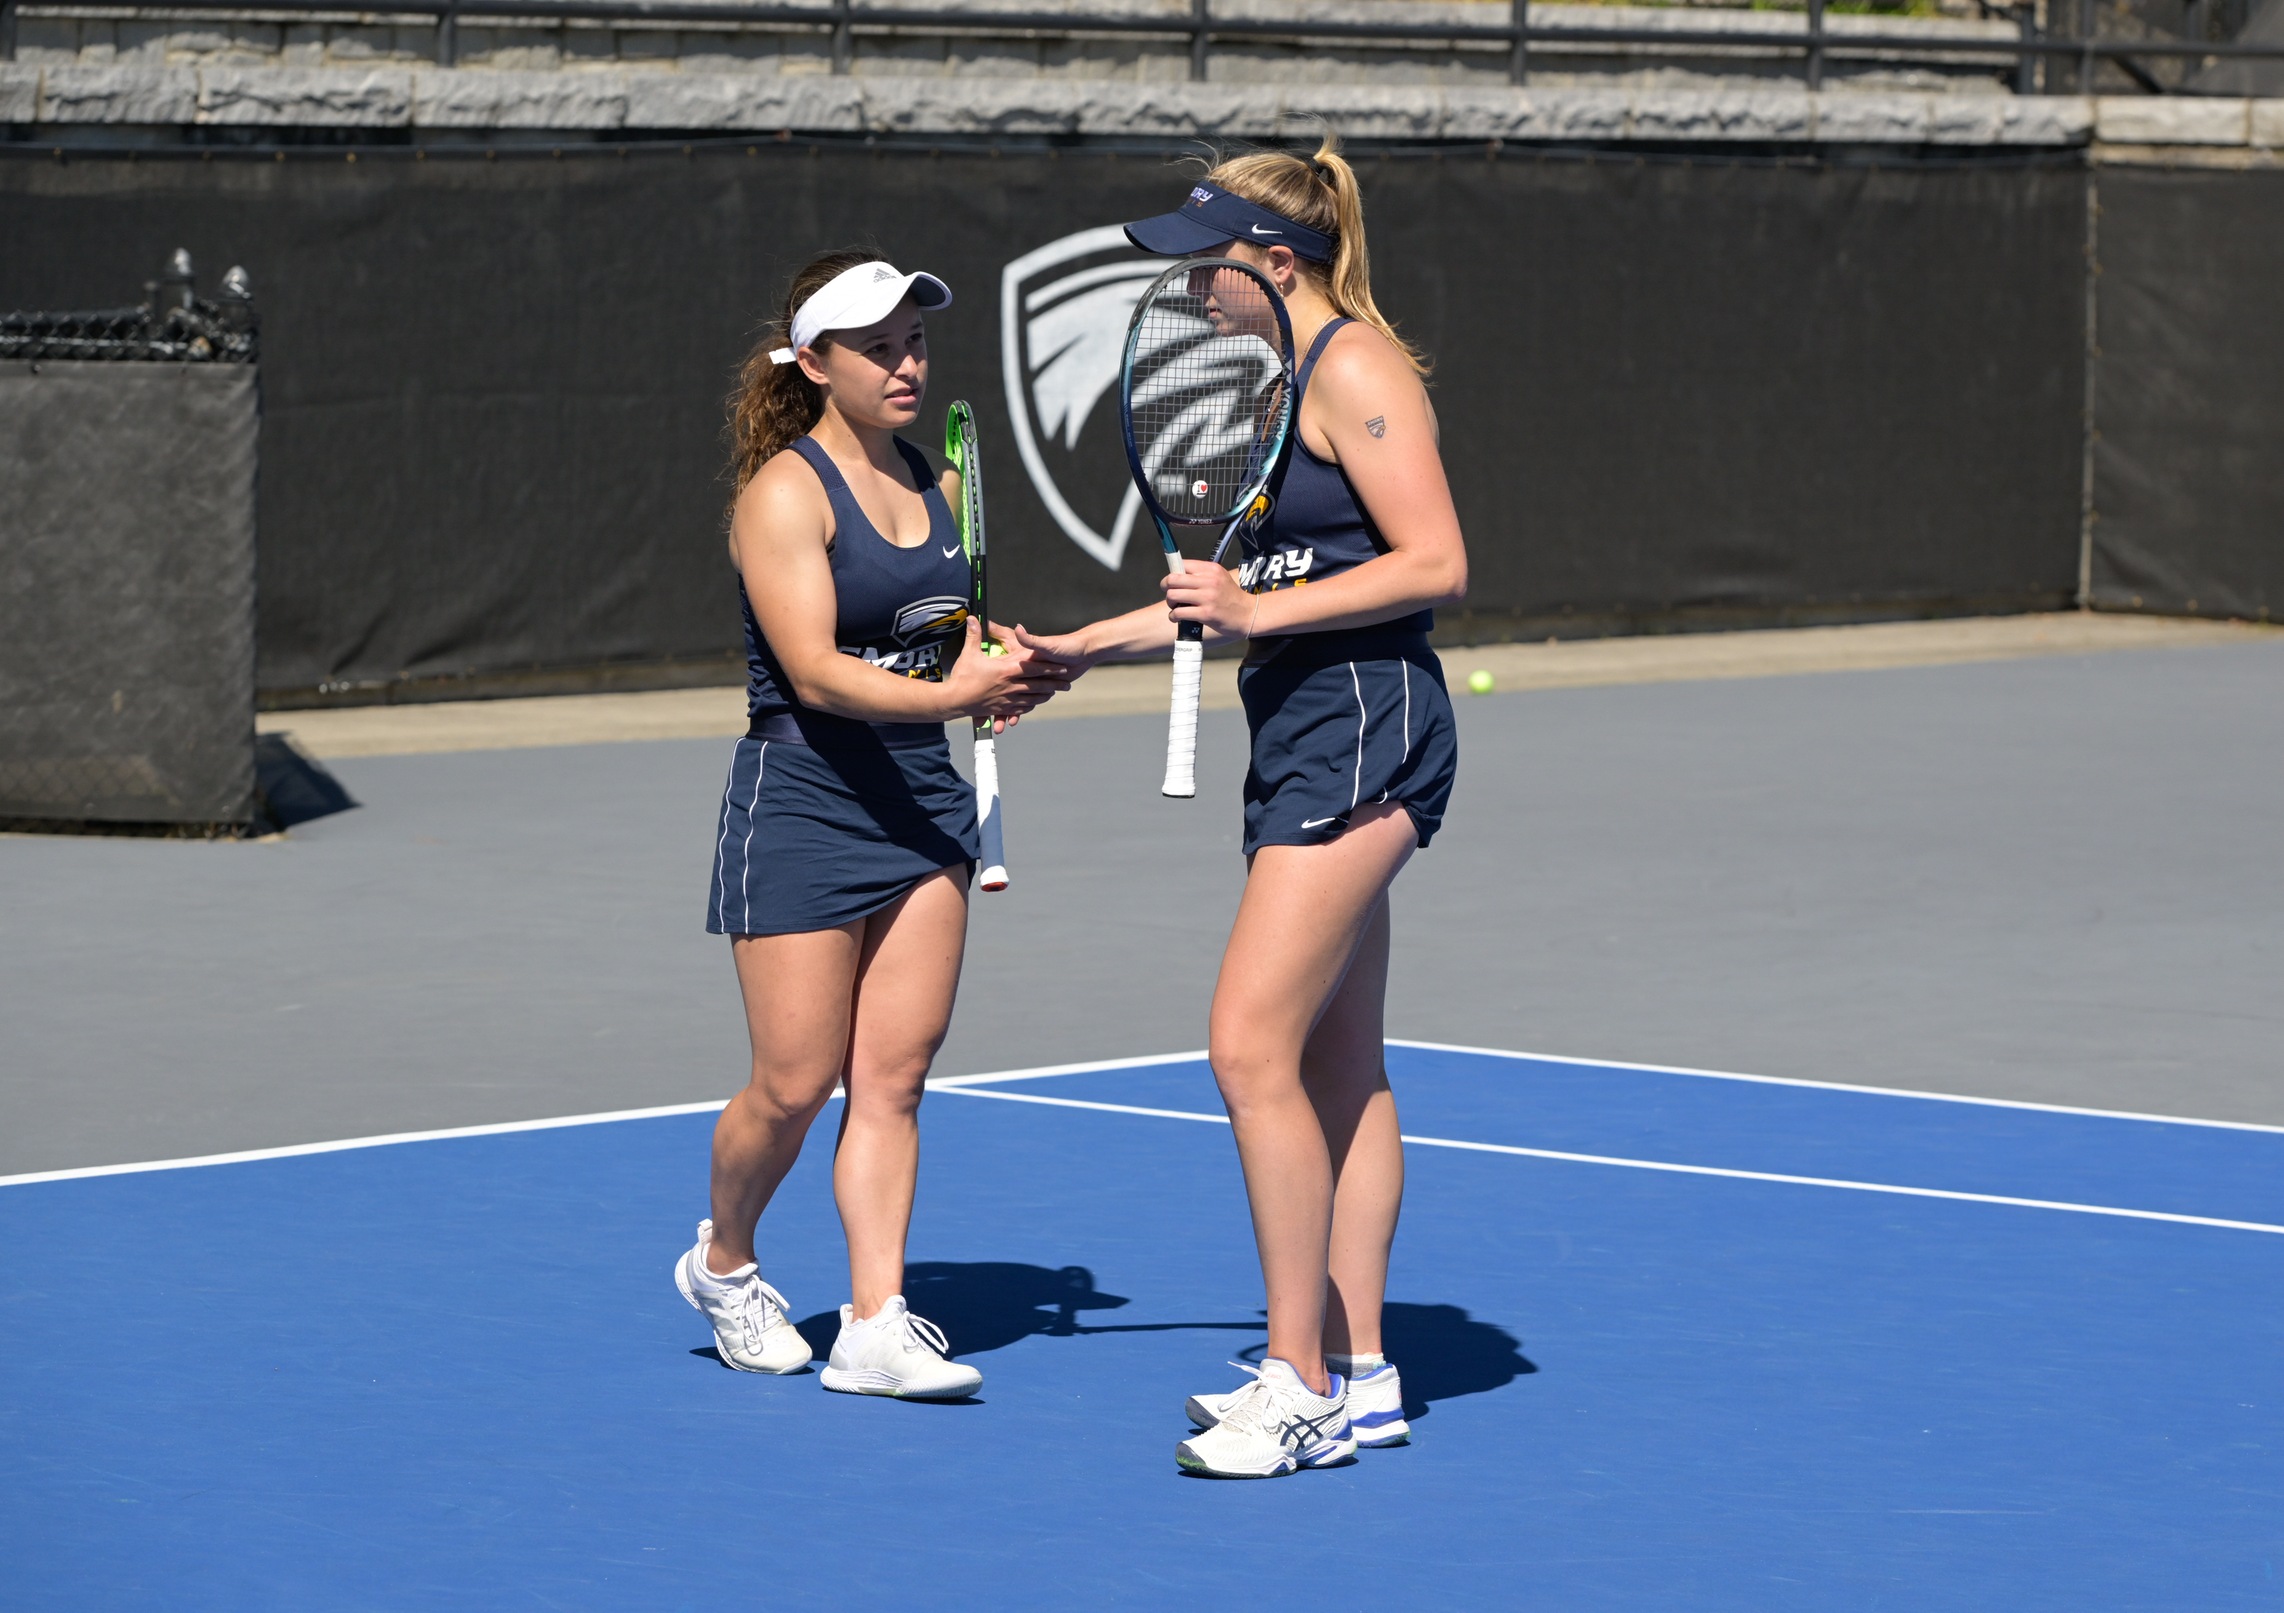 Women’s Tennis Opens UAA Championships with 5-1 win over Brandeis